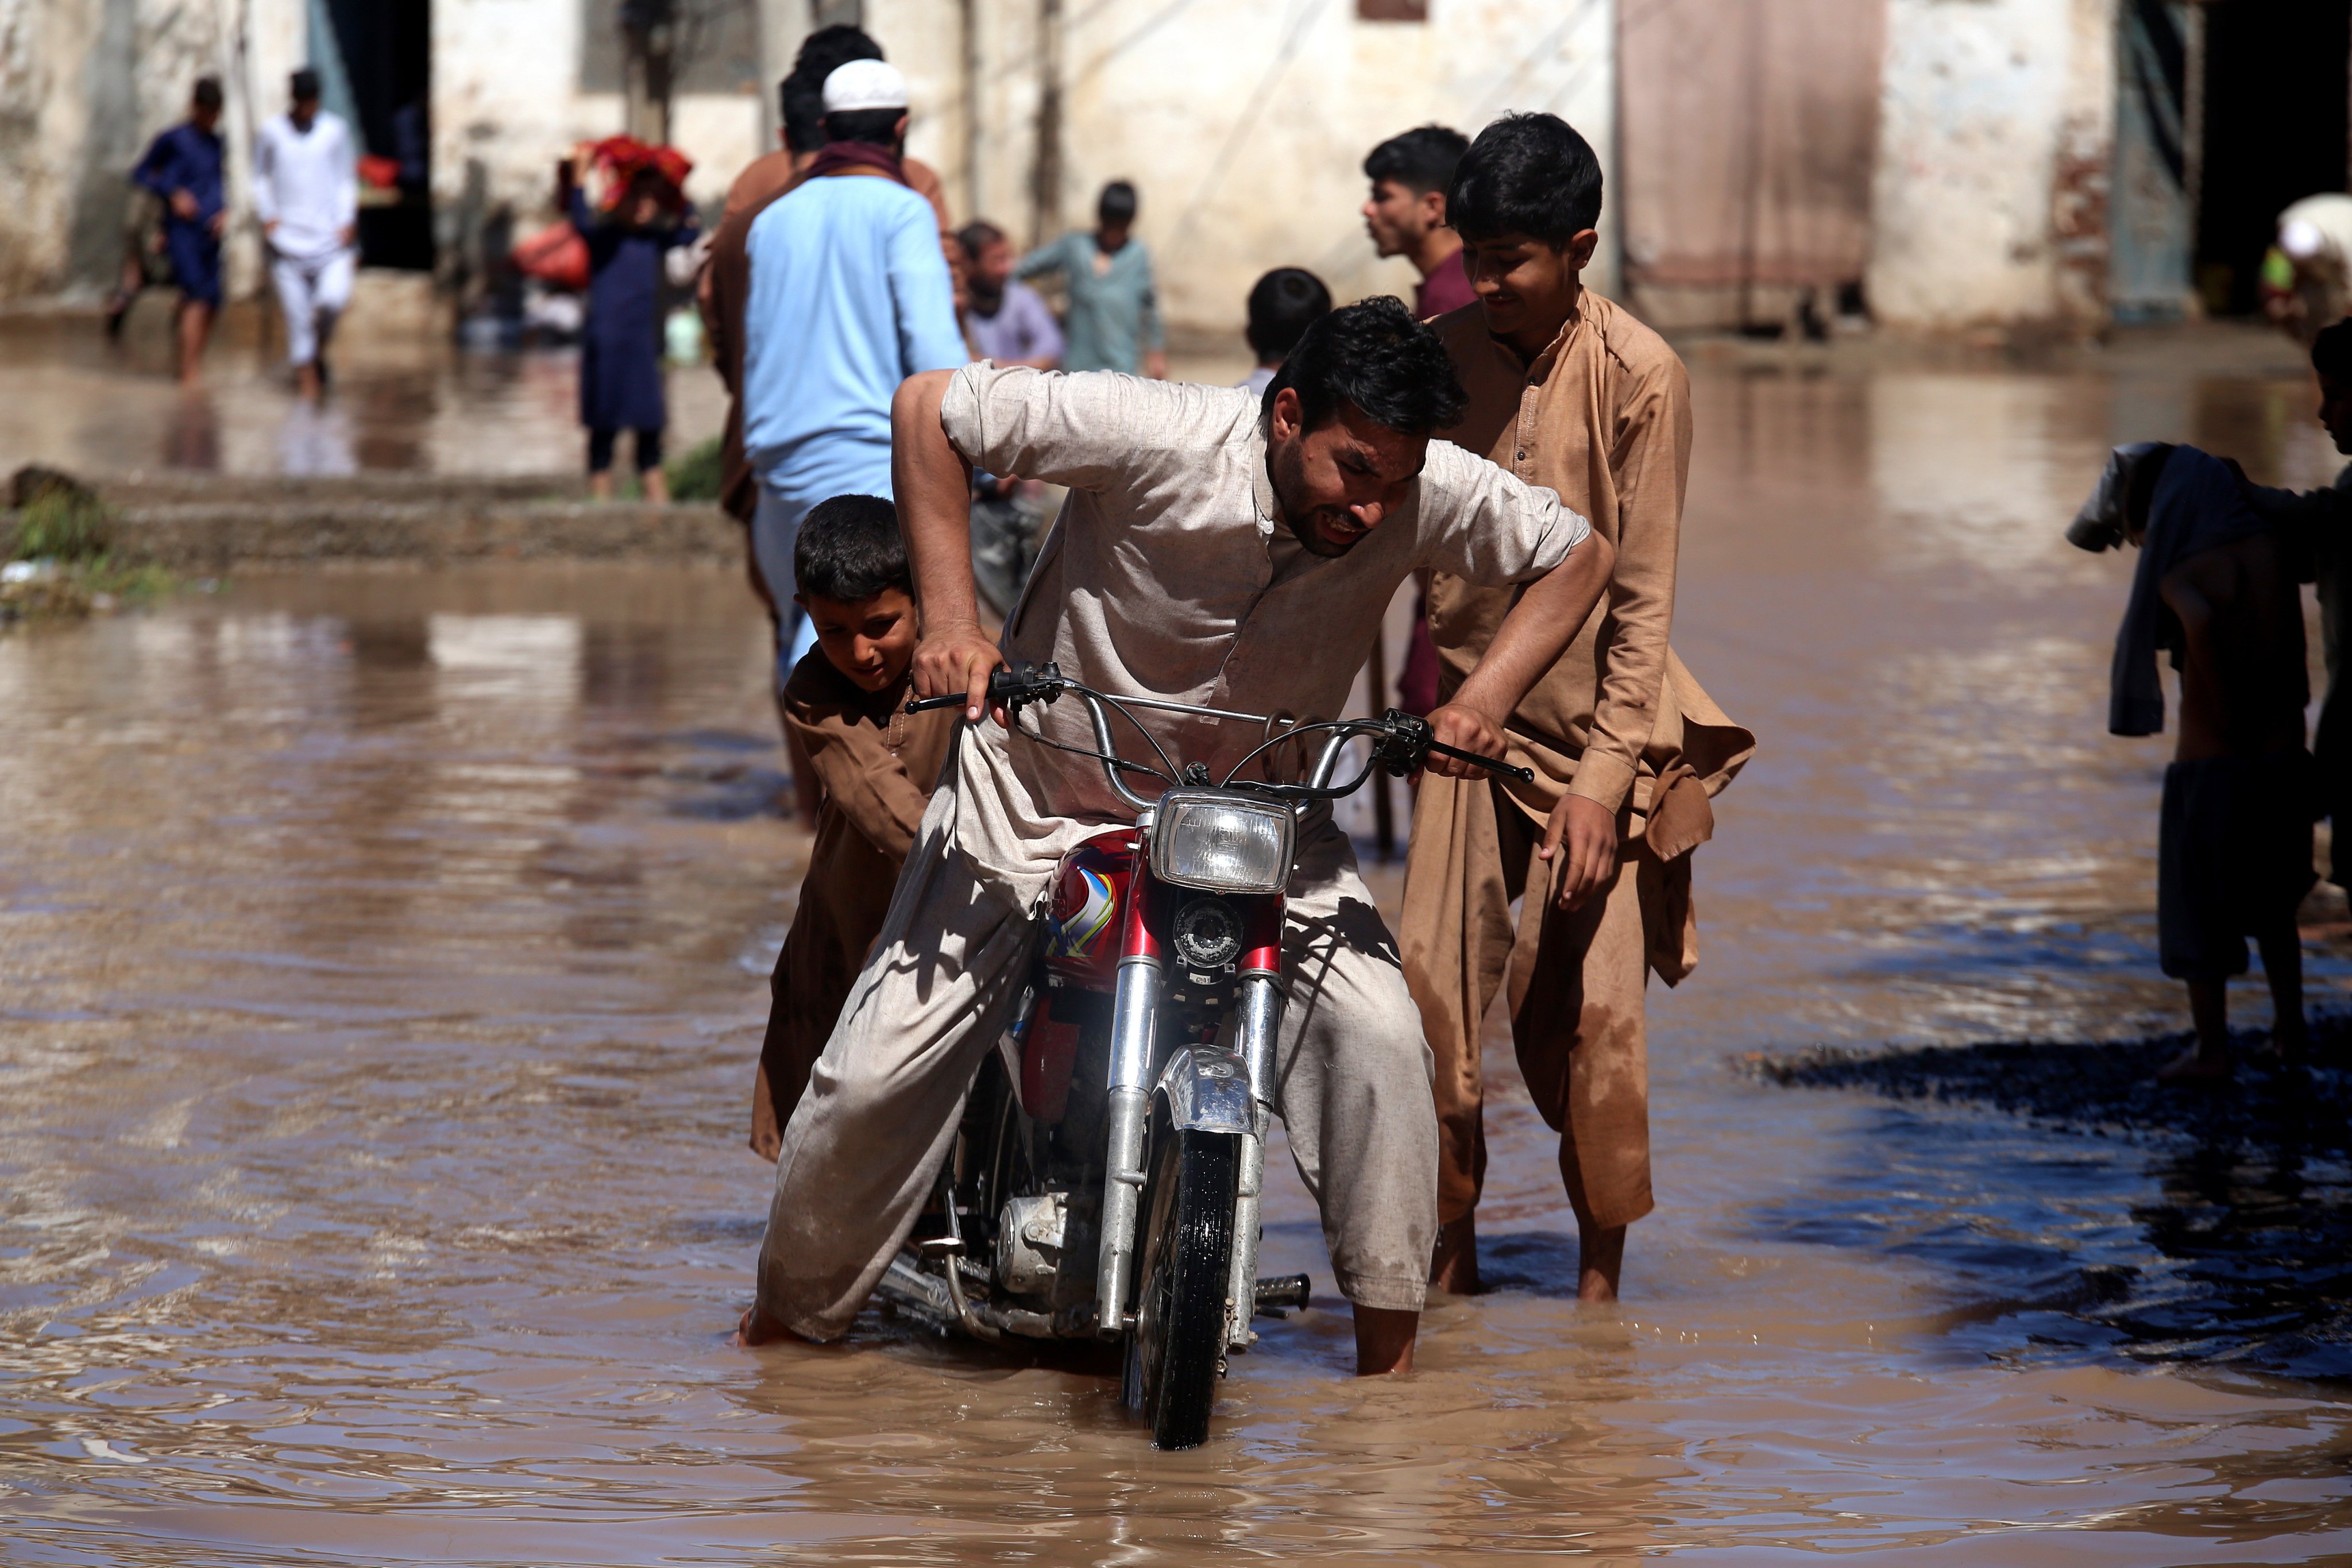 epa11282073 A group of people pushes a motorbike through a flooded street after heavy rain in Khyber Pakhtunkhwa province, Pakistan. Photo: EPA-EFE